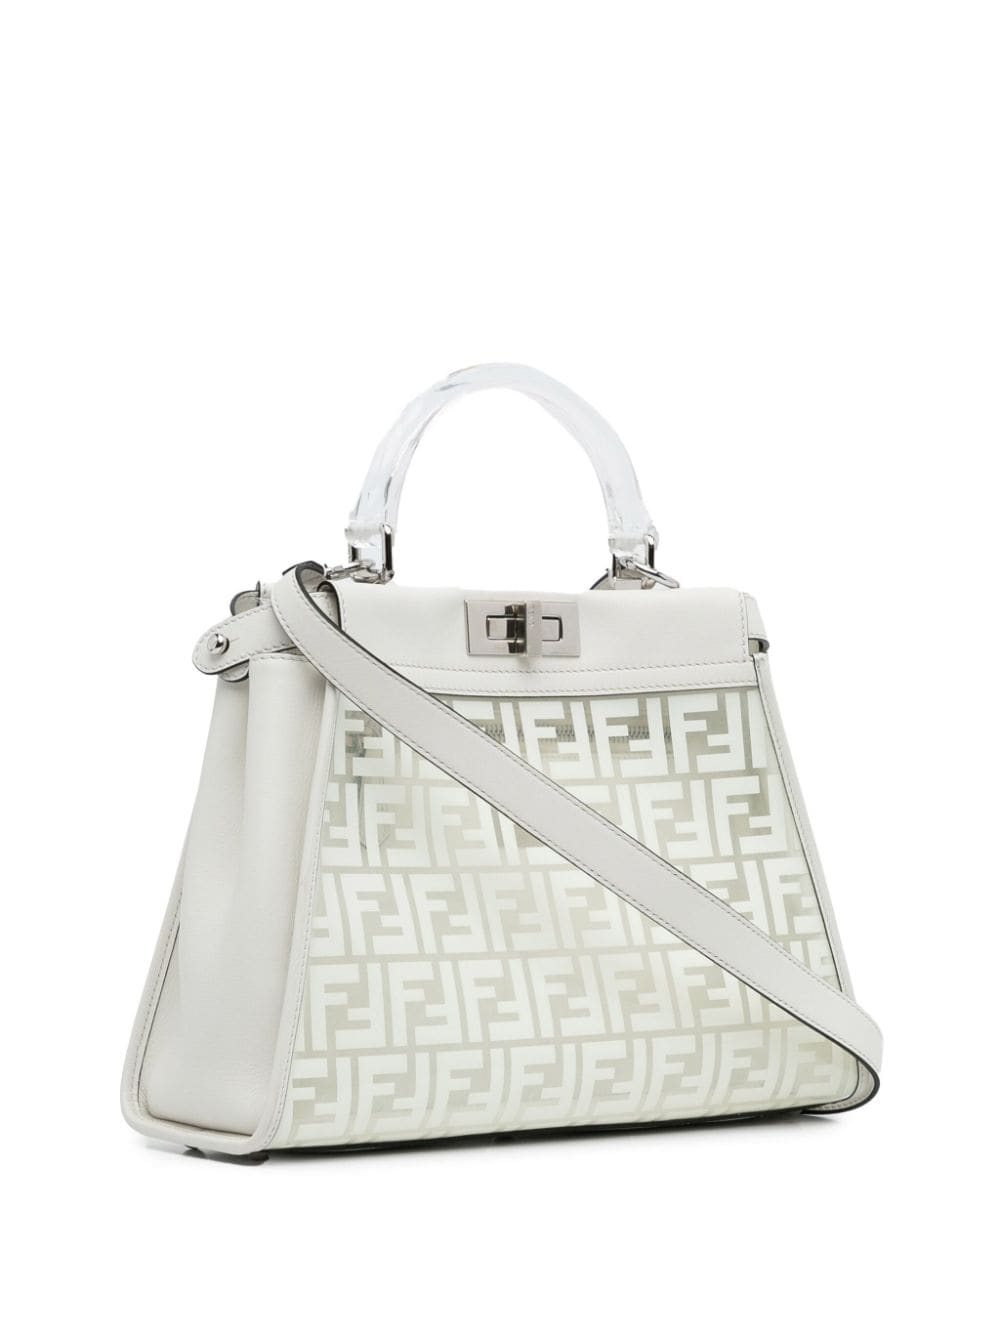 Pre-owned Fendi 21th Century Limited Edition Pvc Peekaboo Satchel In White